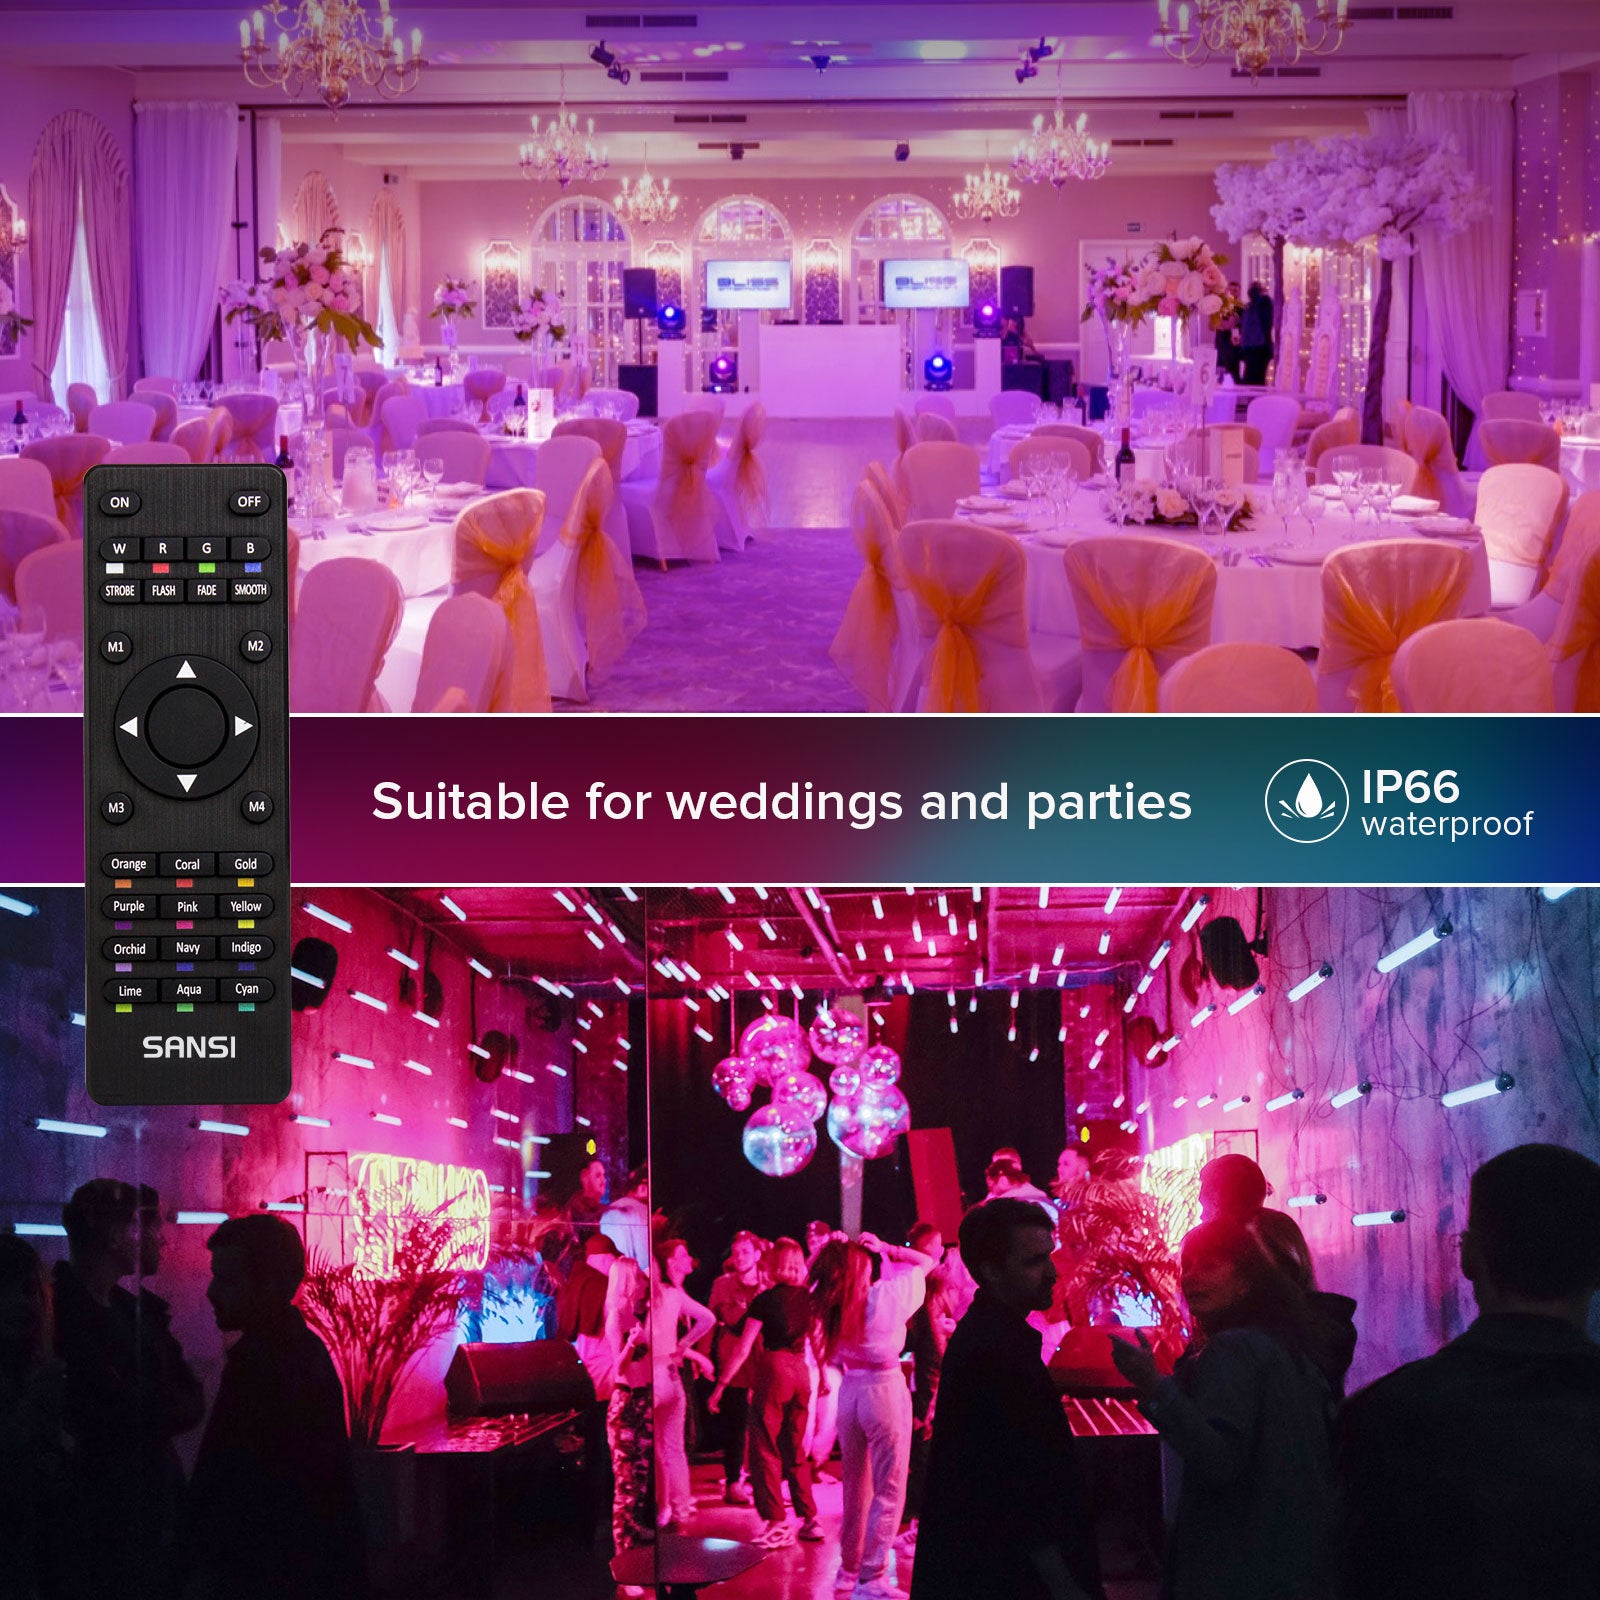 Upgraded 50W RGB LED Flood Light (US ONLY) is IP66 waterproof，which is suitable for weddings and parties.